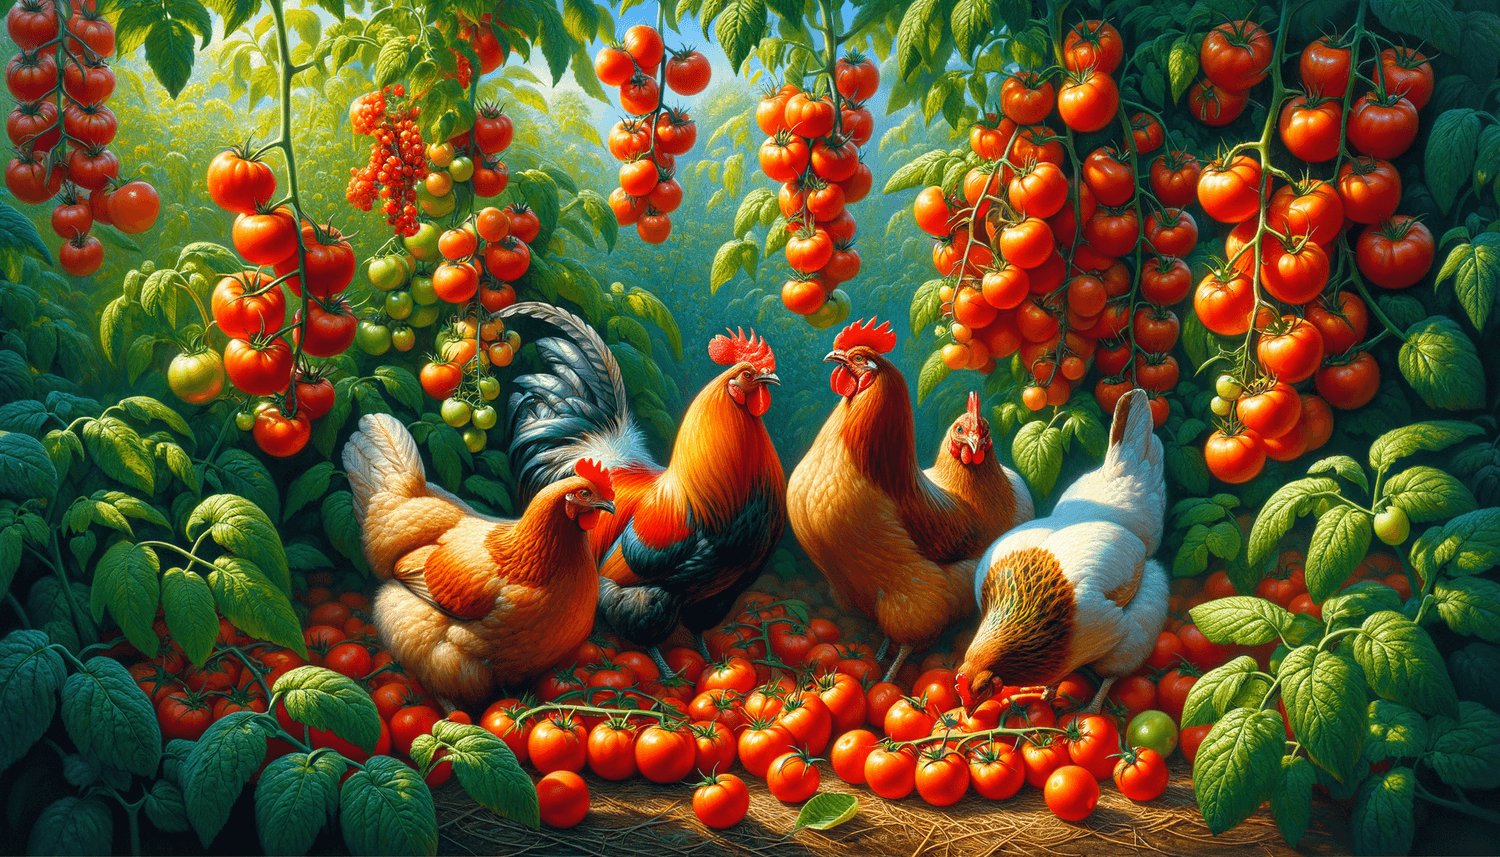 Can Chickens Eat Tomatoes from the Garden?